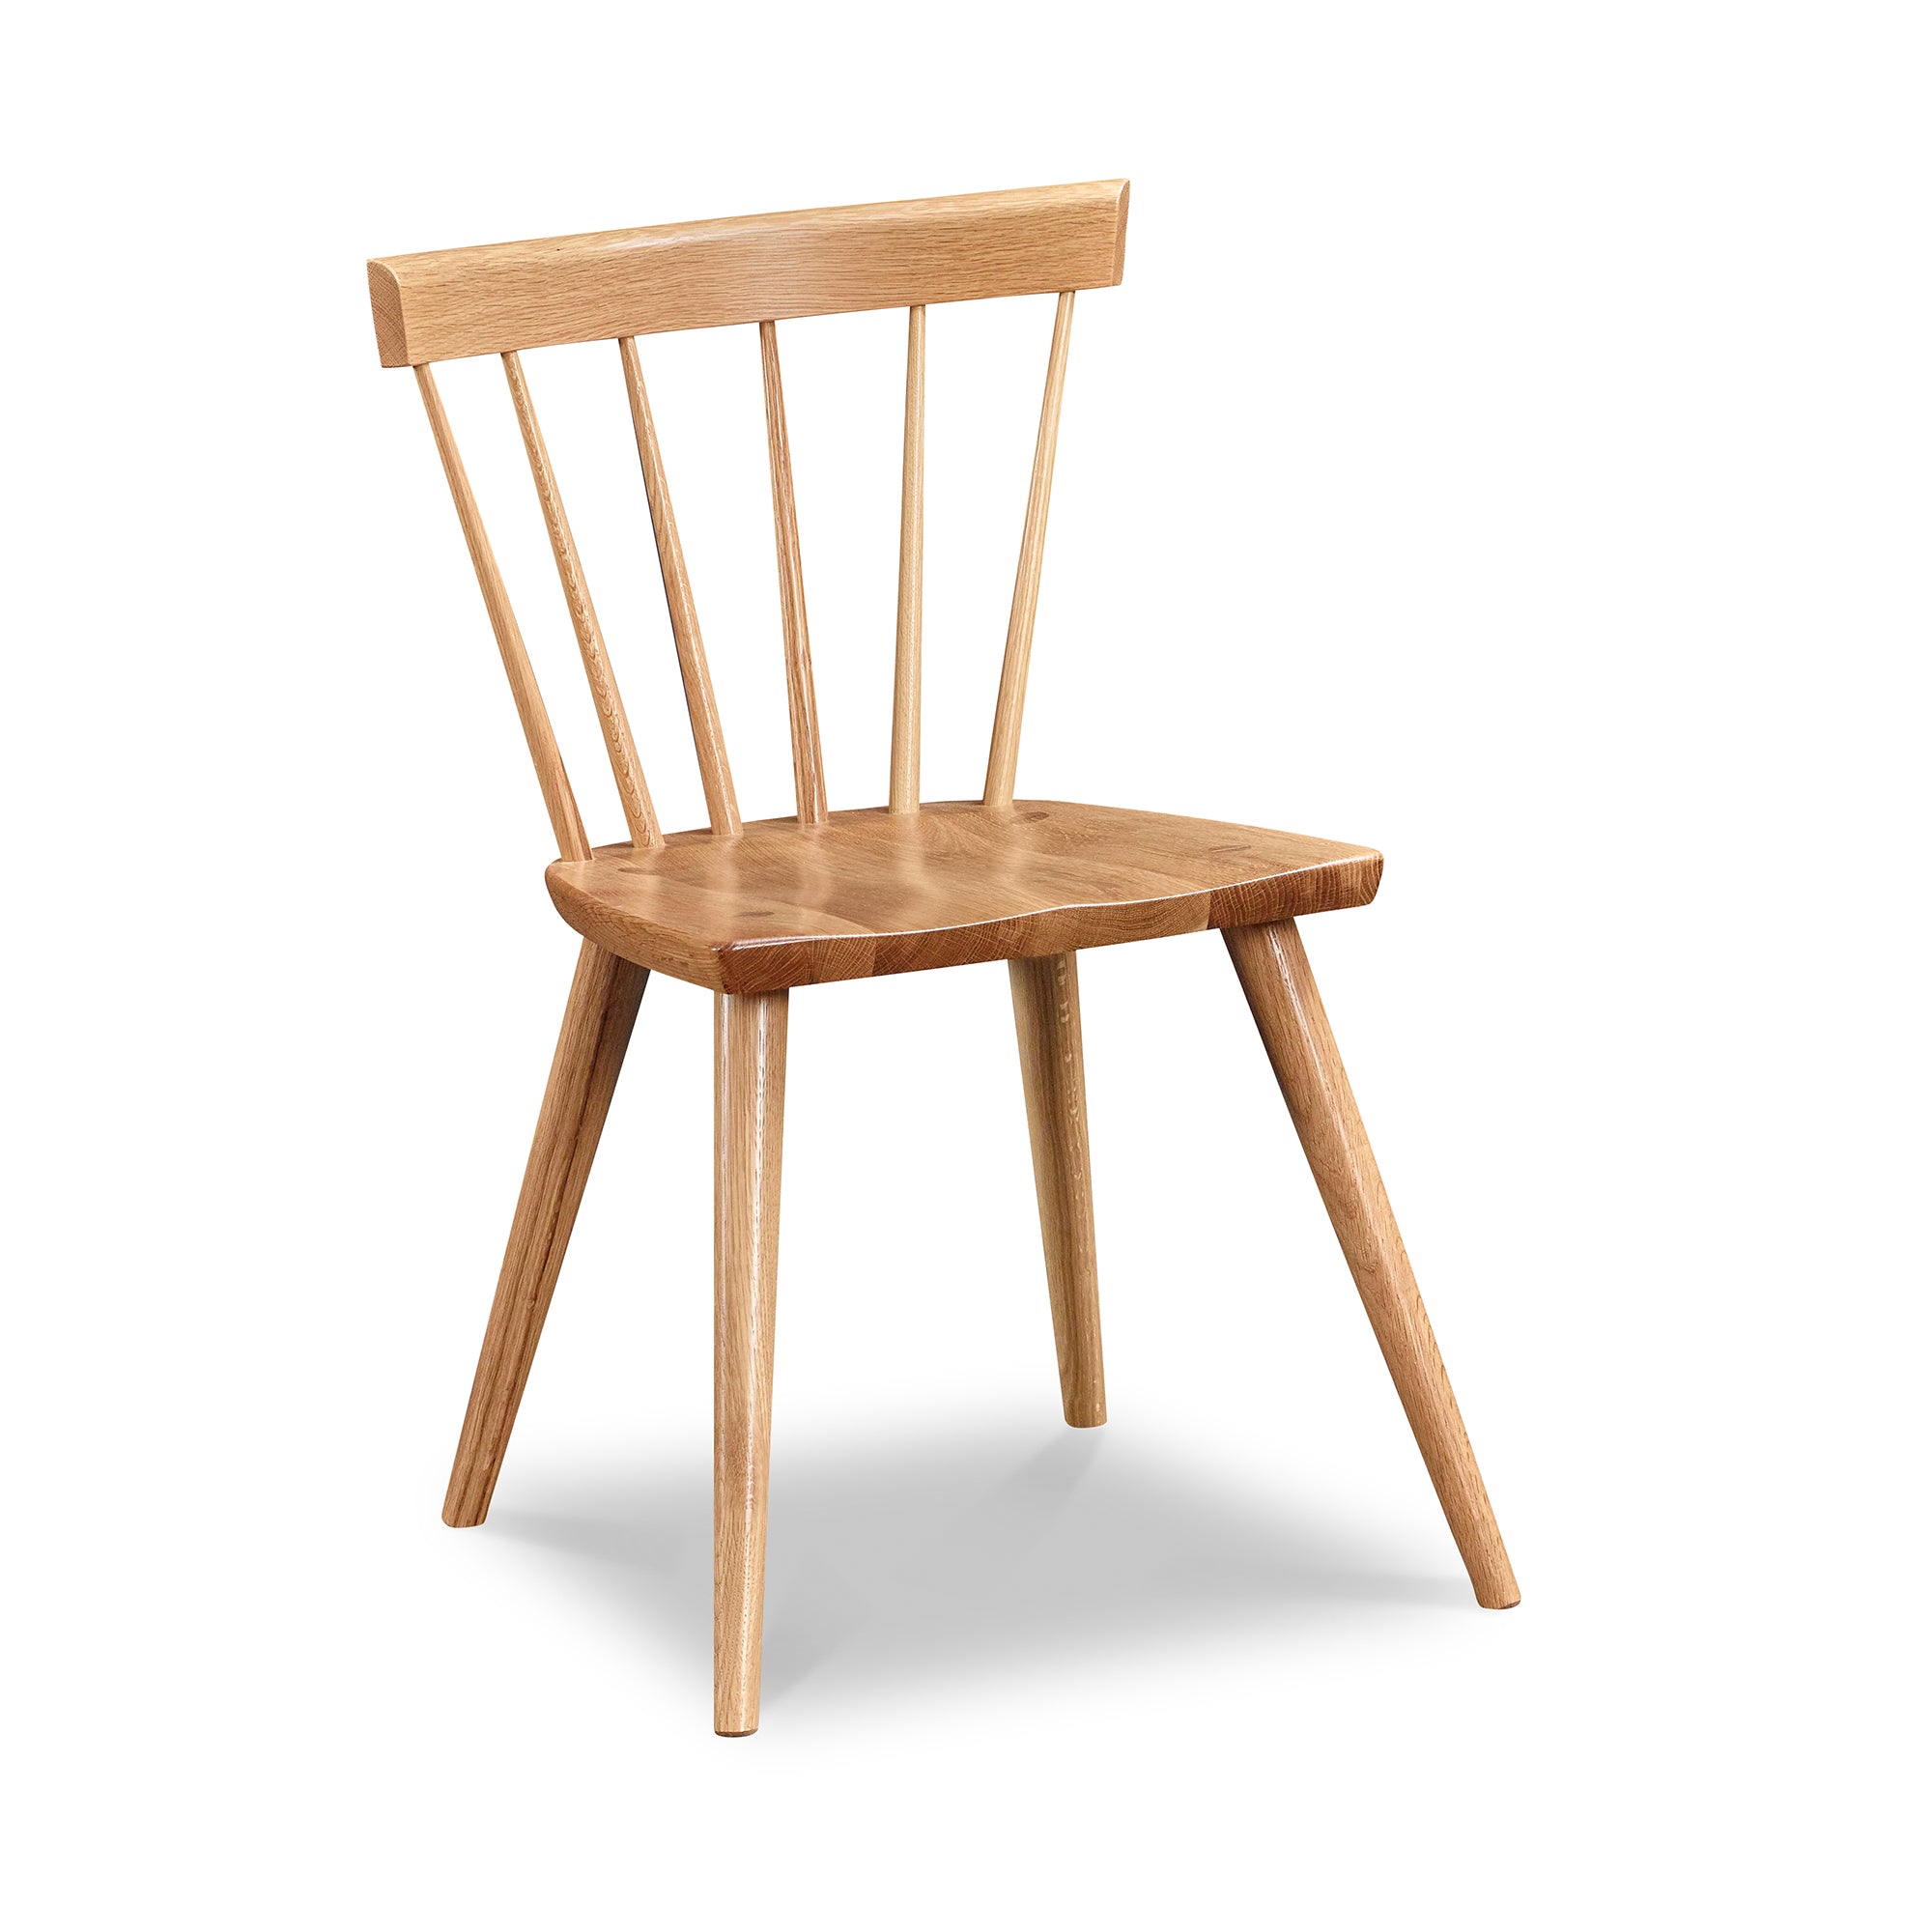 Modern Windsor inspired spindle chair with curved back in white oak